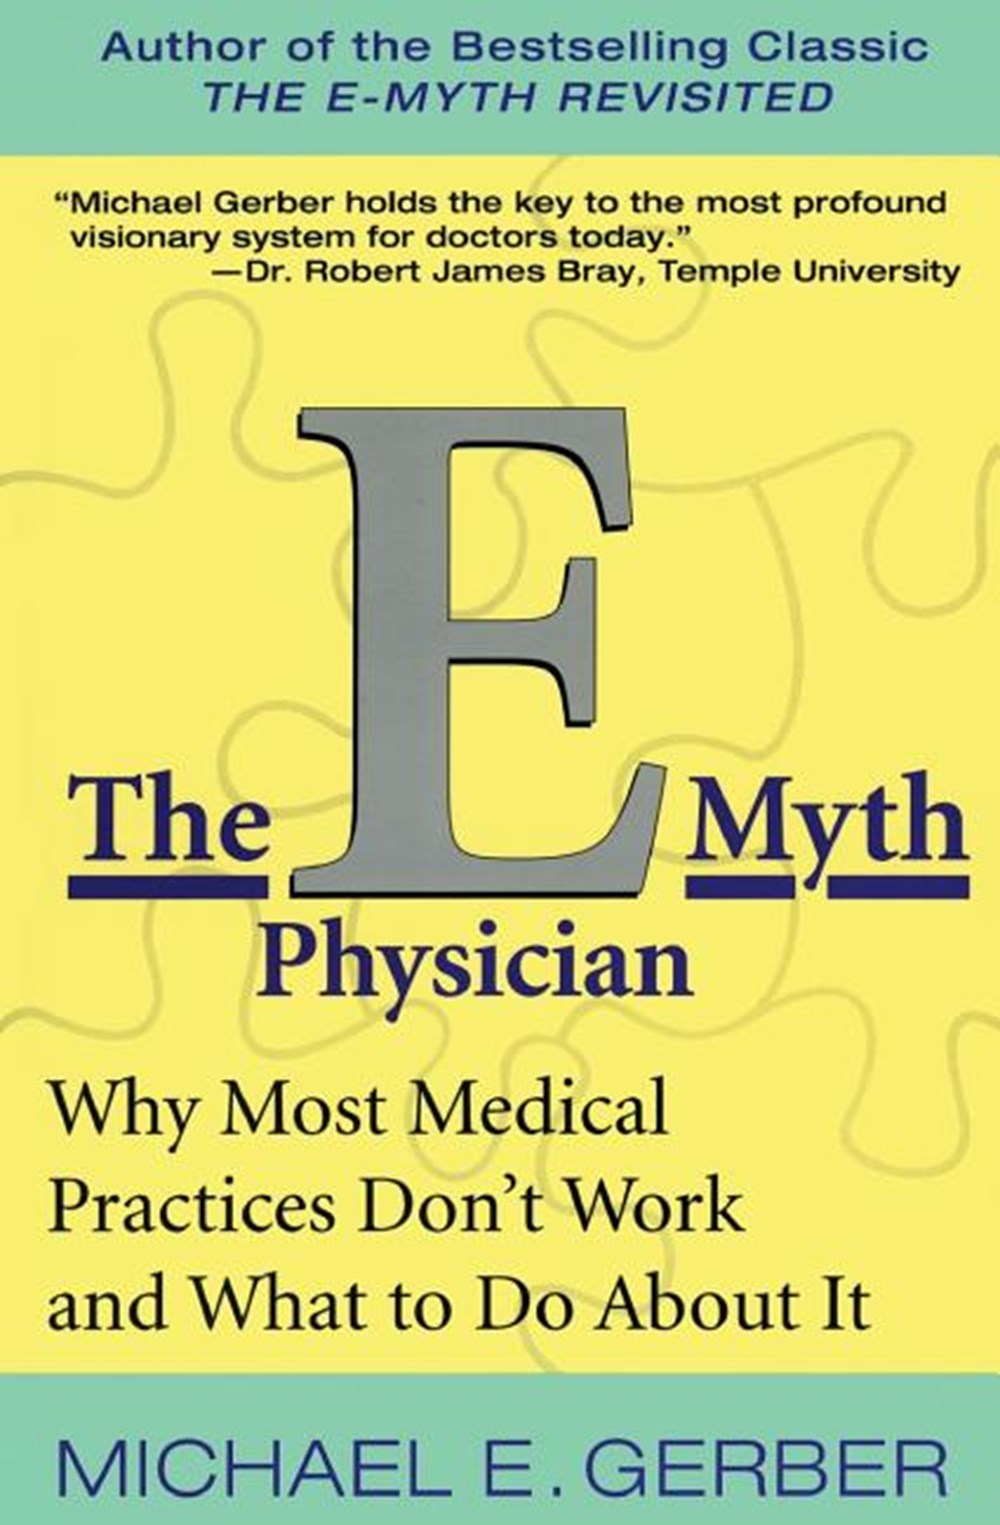 E-Myth Physician: Why Most Medical Practices Don't Work and What to Do about It